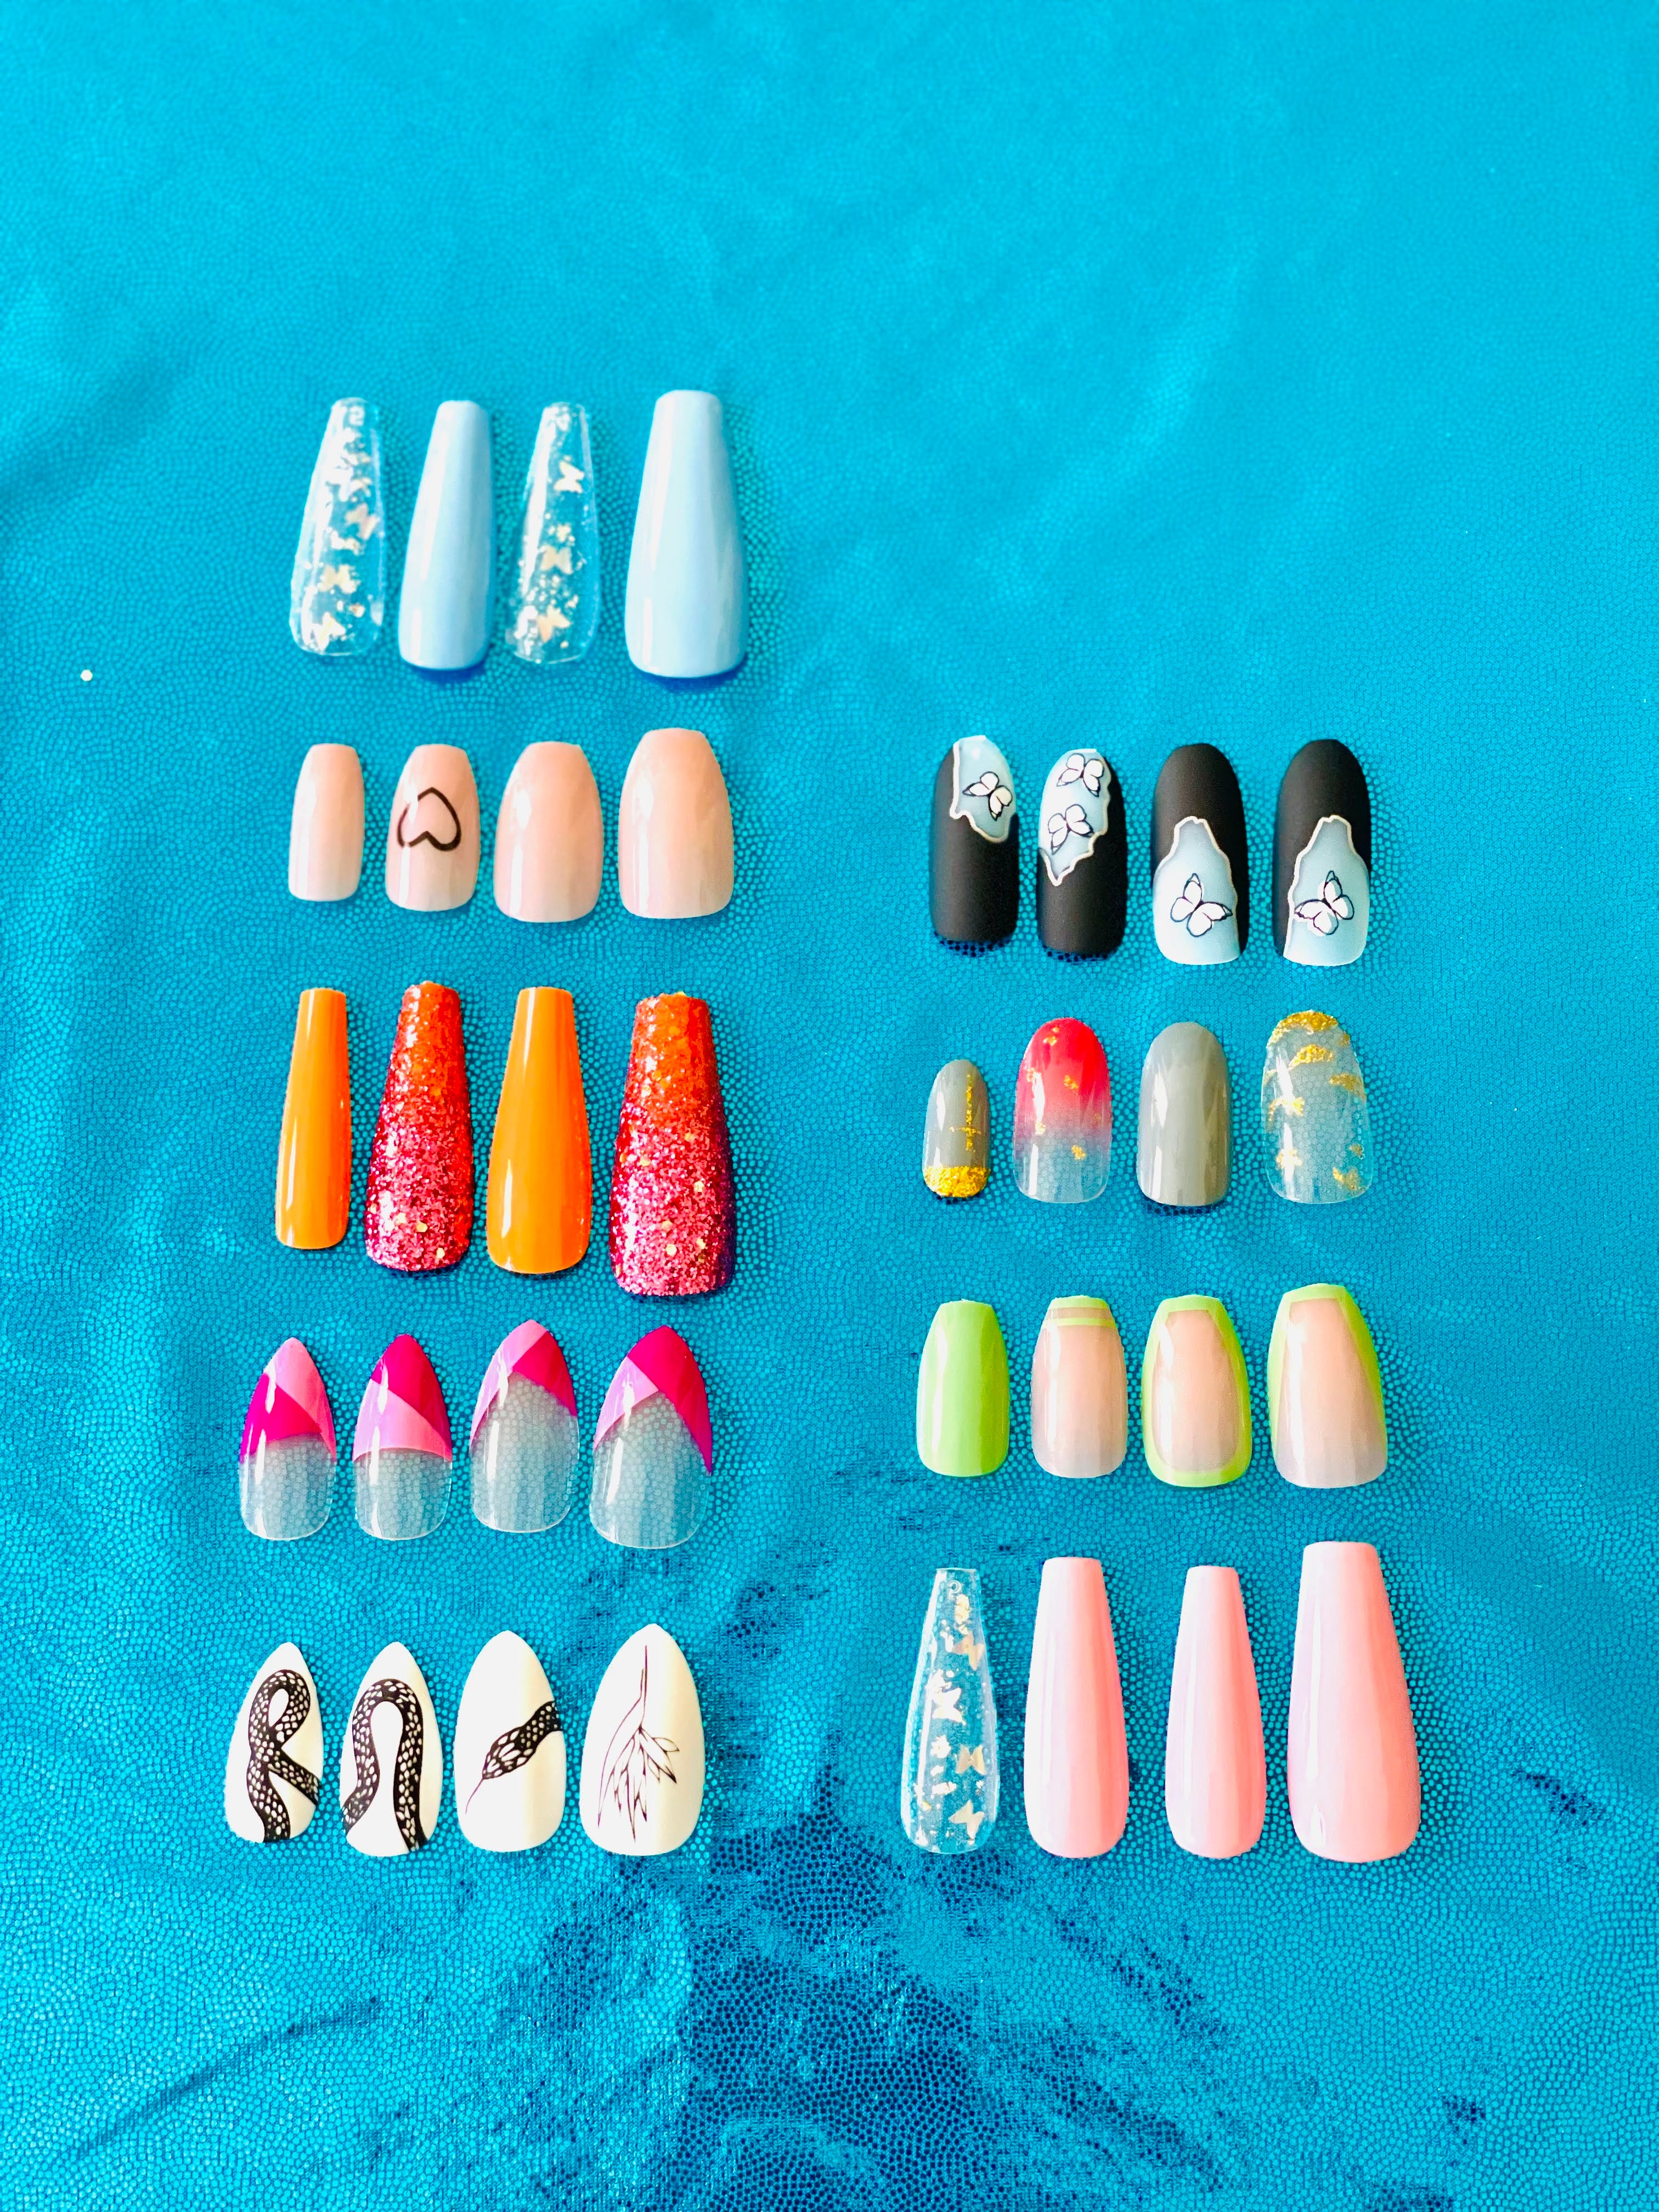 Image featuring a collection of nails in diverse shapes such as round, square, almond, and coffin, with varying lengths from short to extra-long, and an array of colors from pastel to deep shades, arranged for visual comparison.